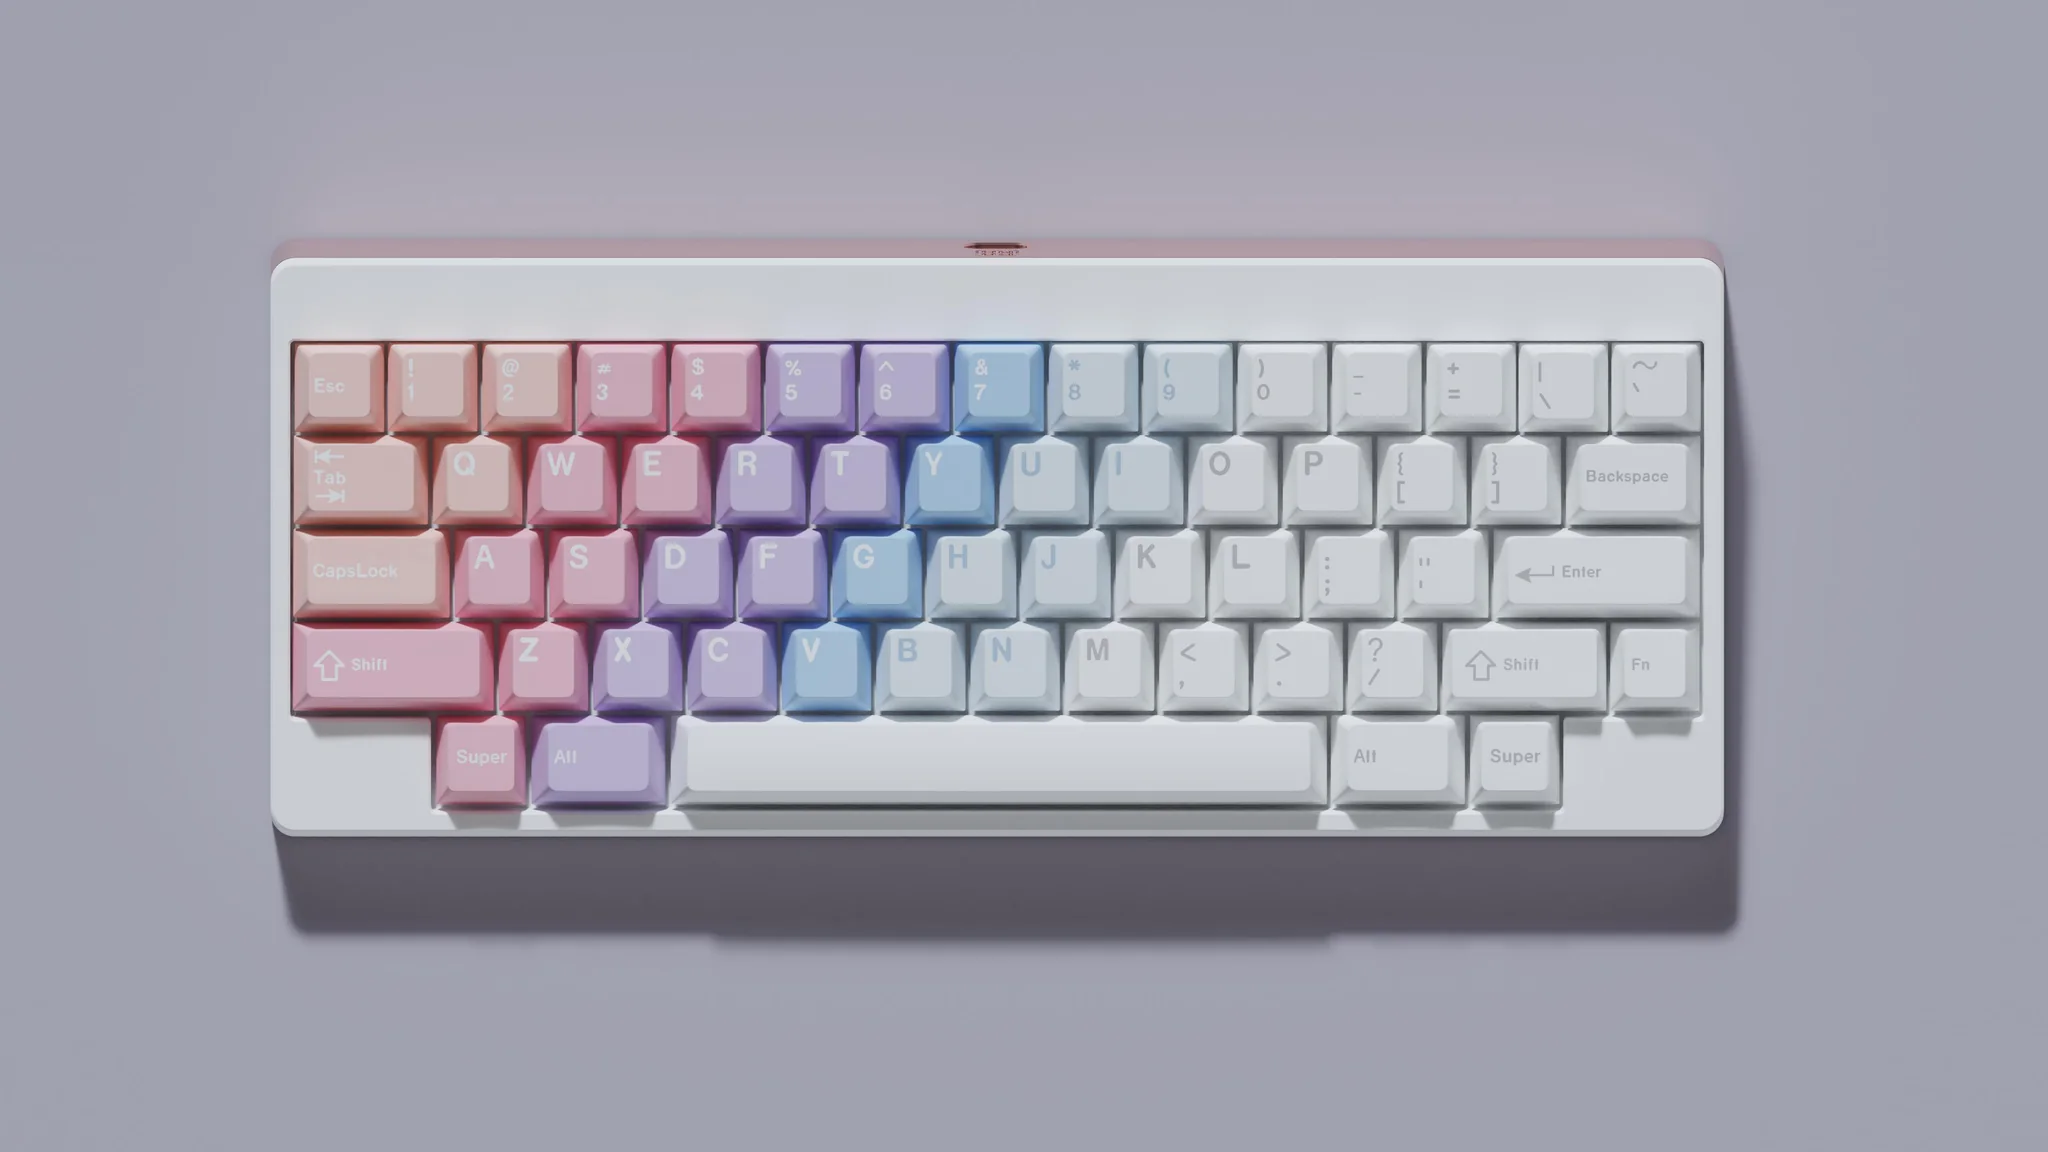 TA top-down view of a mechanical keyboard with ANSI layout. Its keycaps form a sort of gradient, colours in stripes going diagonally left to right from peach to pink to purple to blue to white.